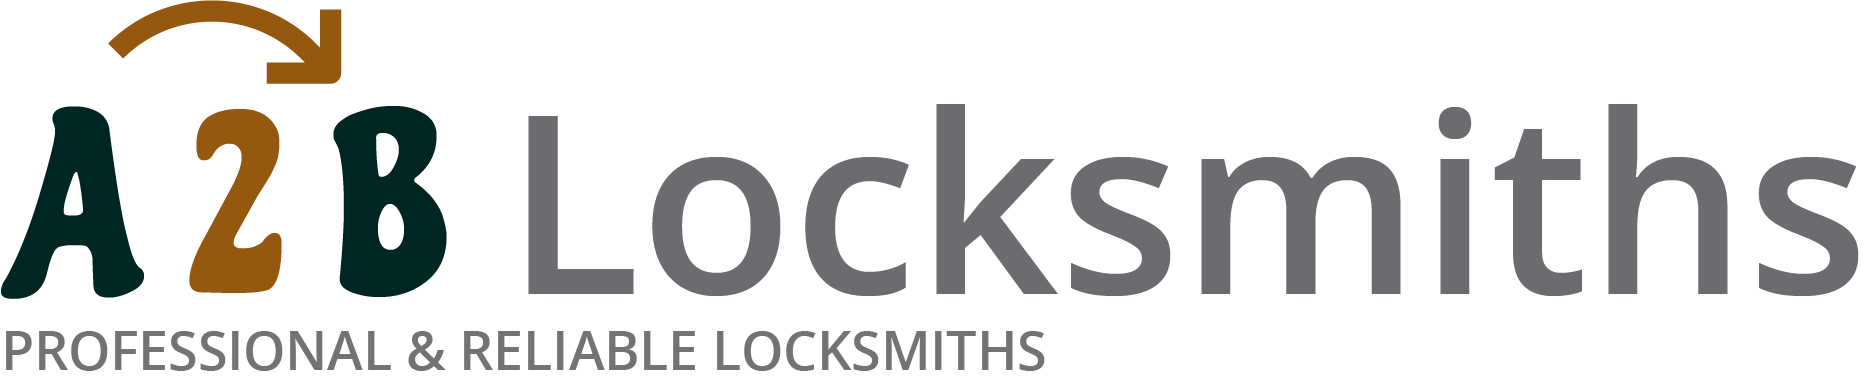 If you are locked out of house in Letchworth, our 24/7 local emergency locksmith services can help you.